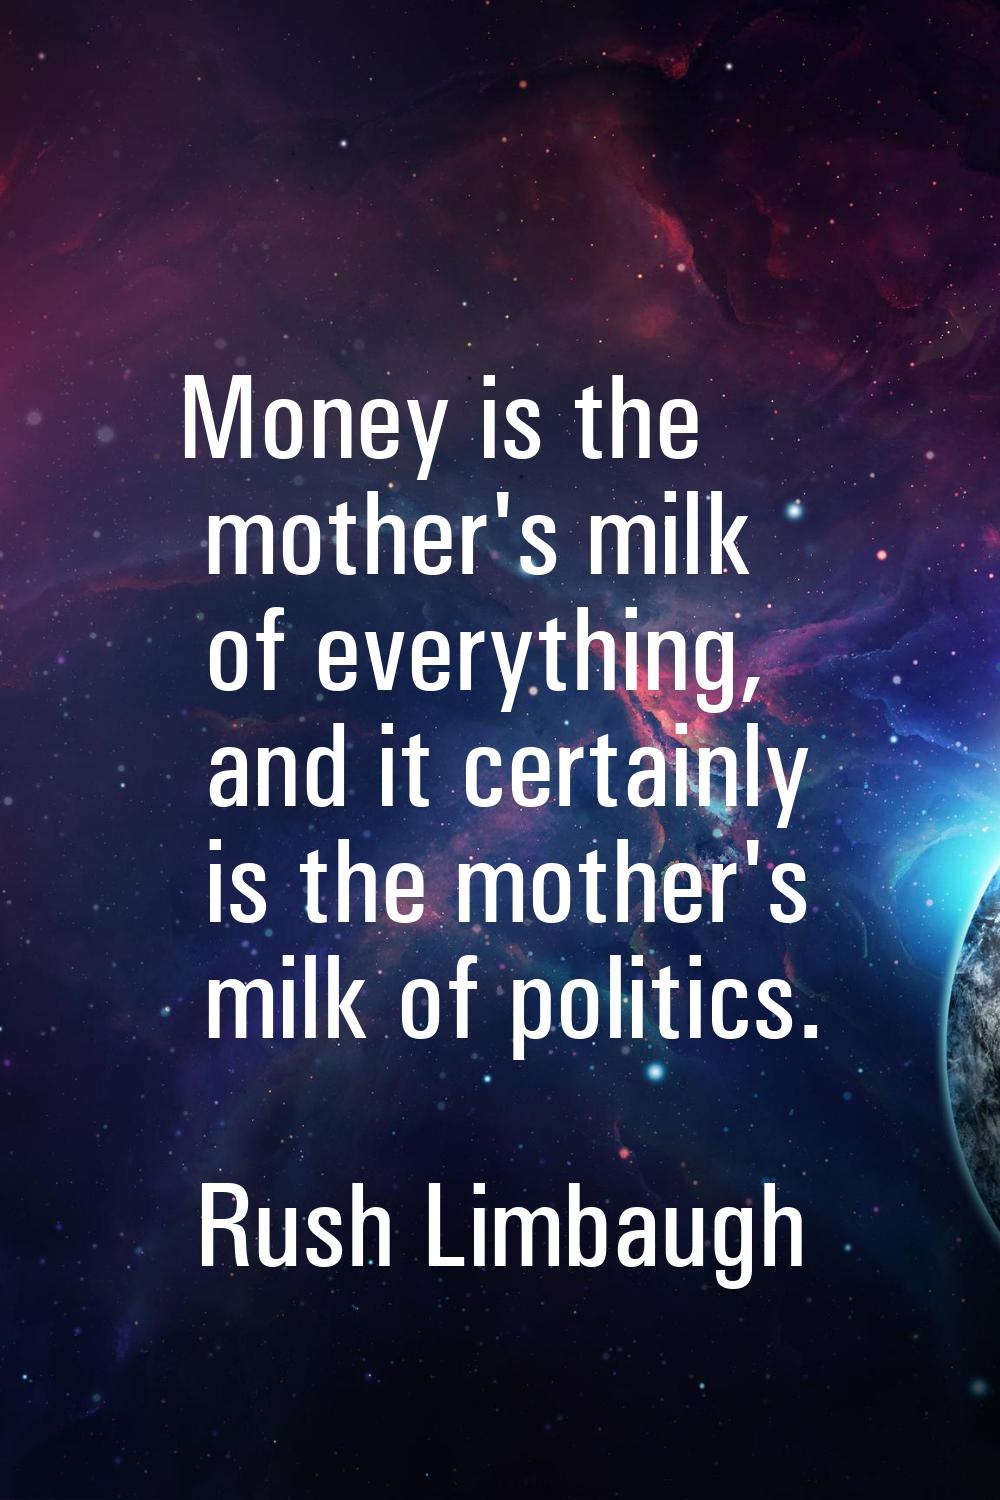 Money is the mother's milk of everything, and it certainly is the mother's milk of politics.